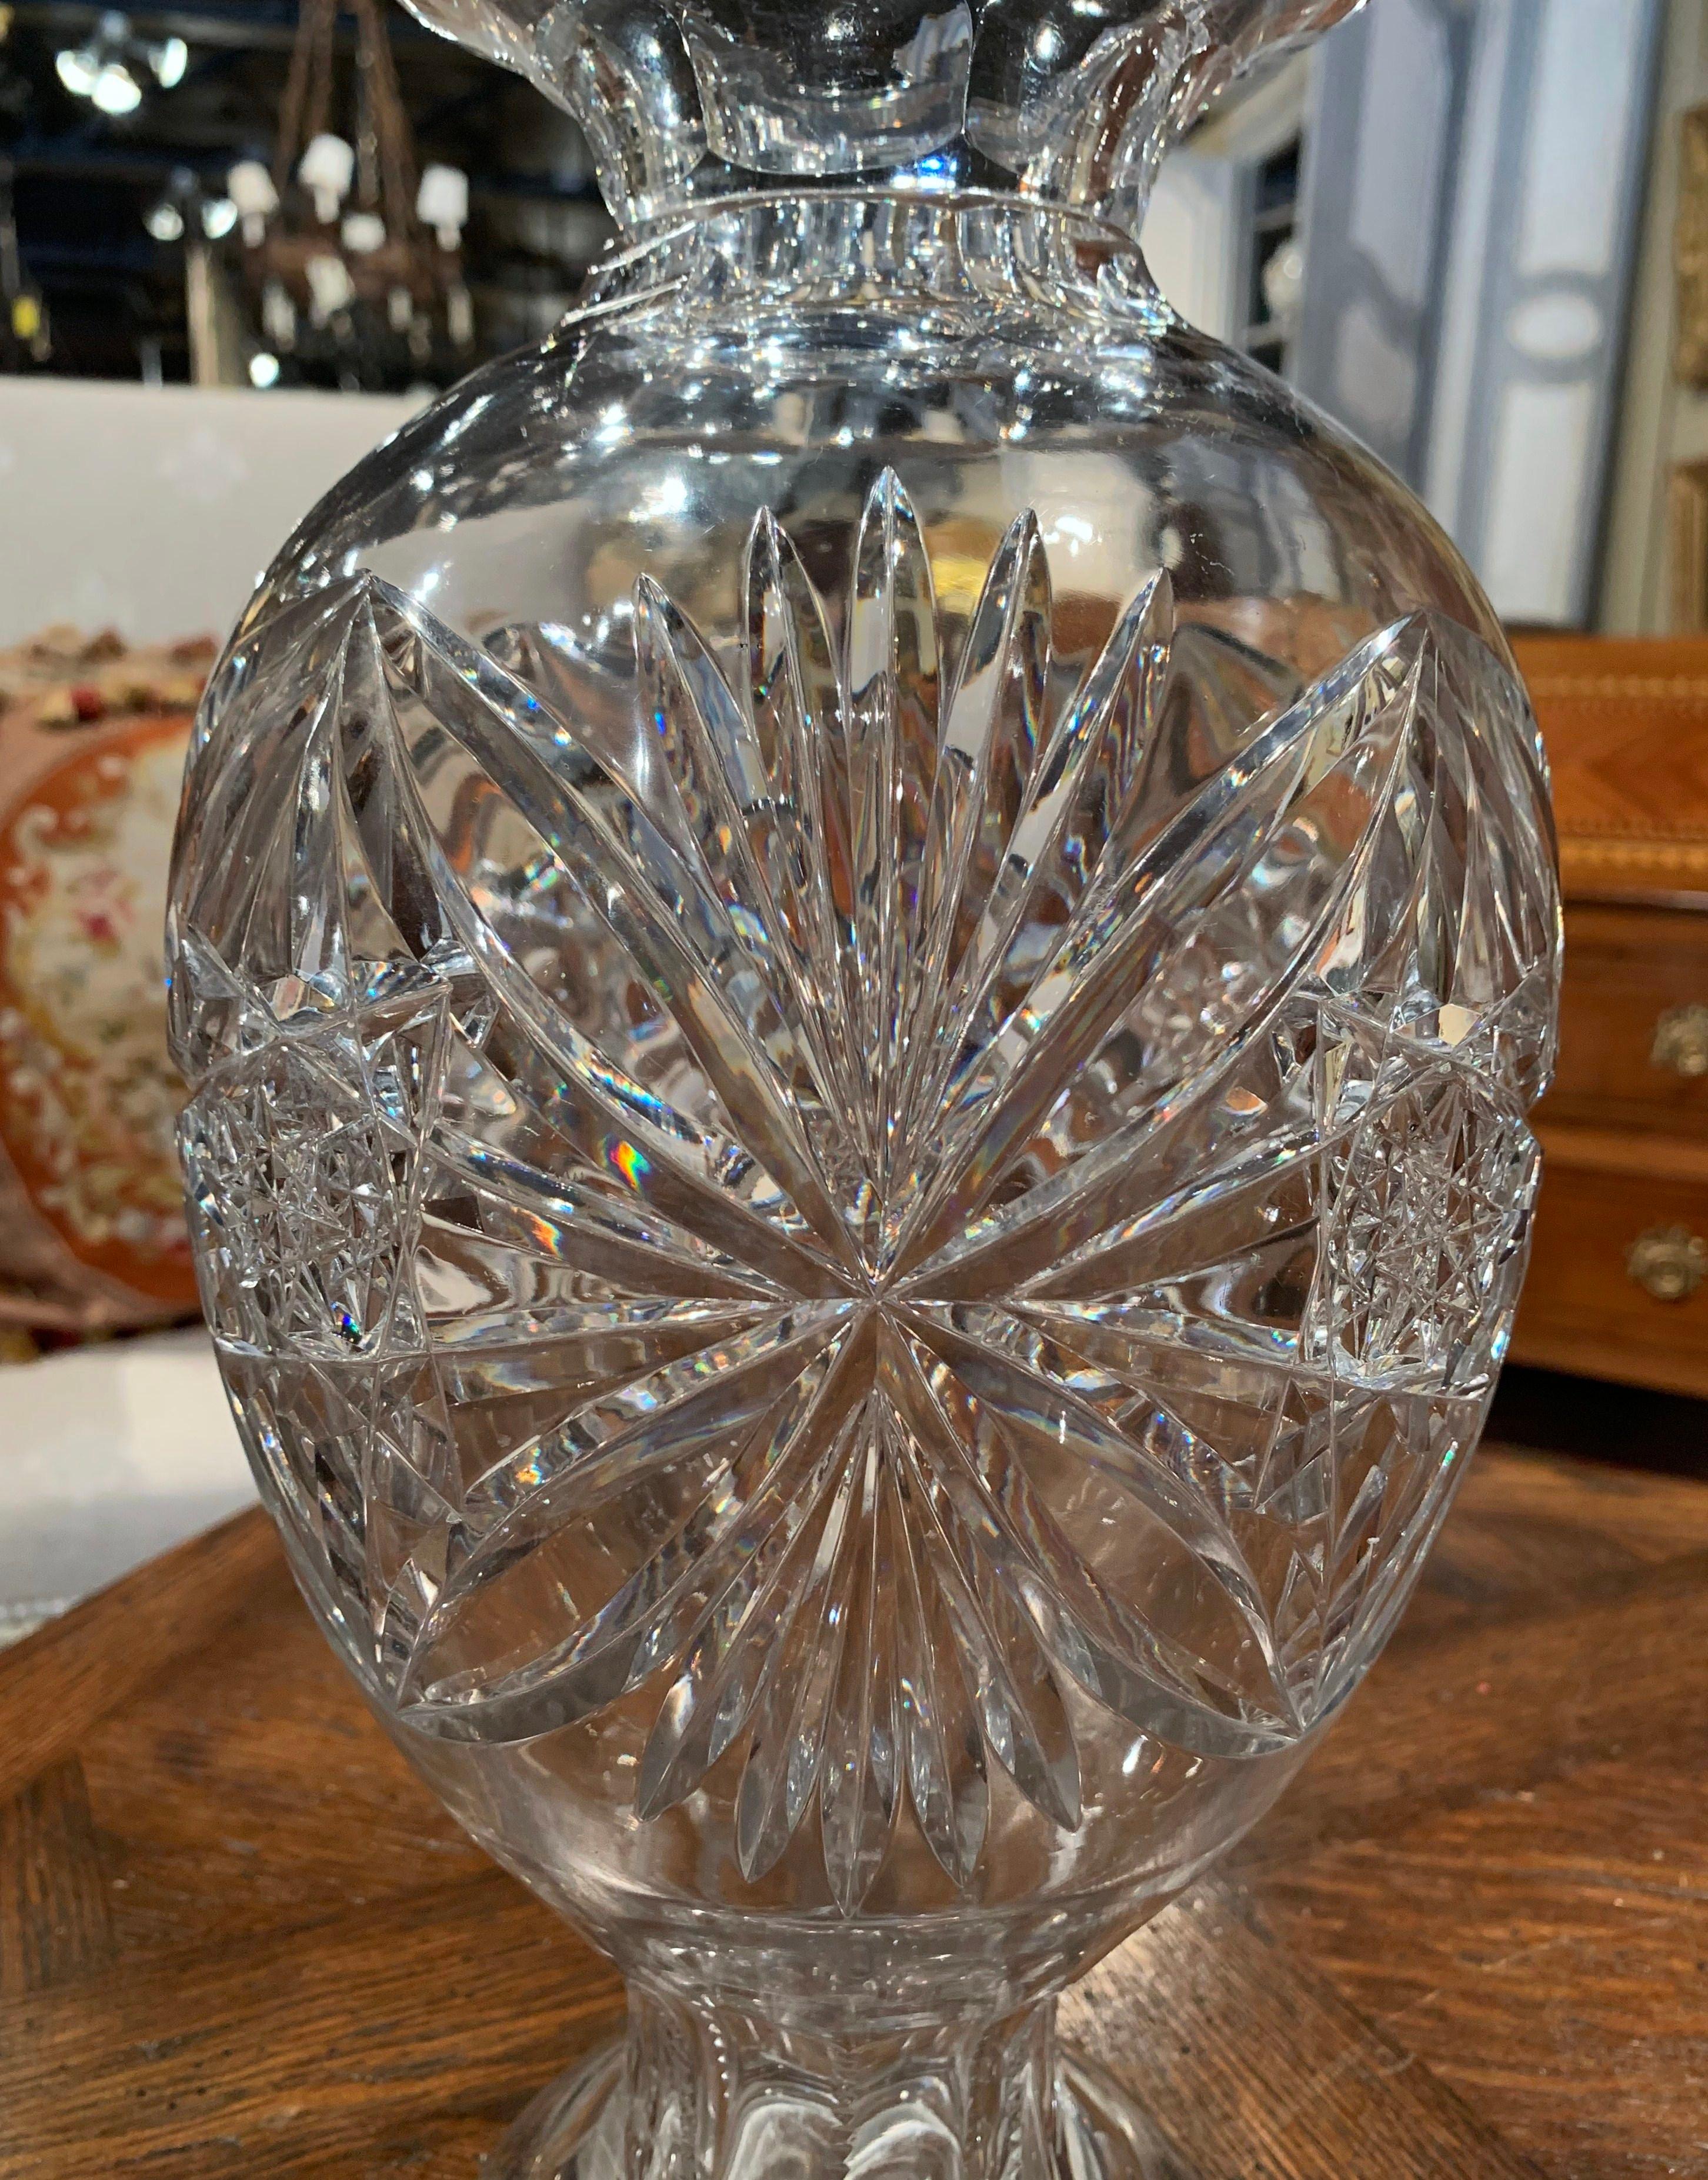 20th Century Midcentury Clear Cut Glass Vase with Foliage and Star Motifs